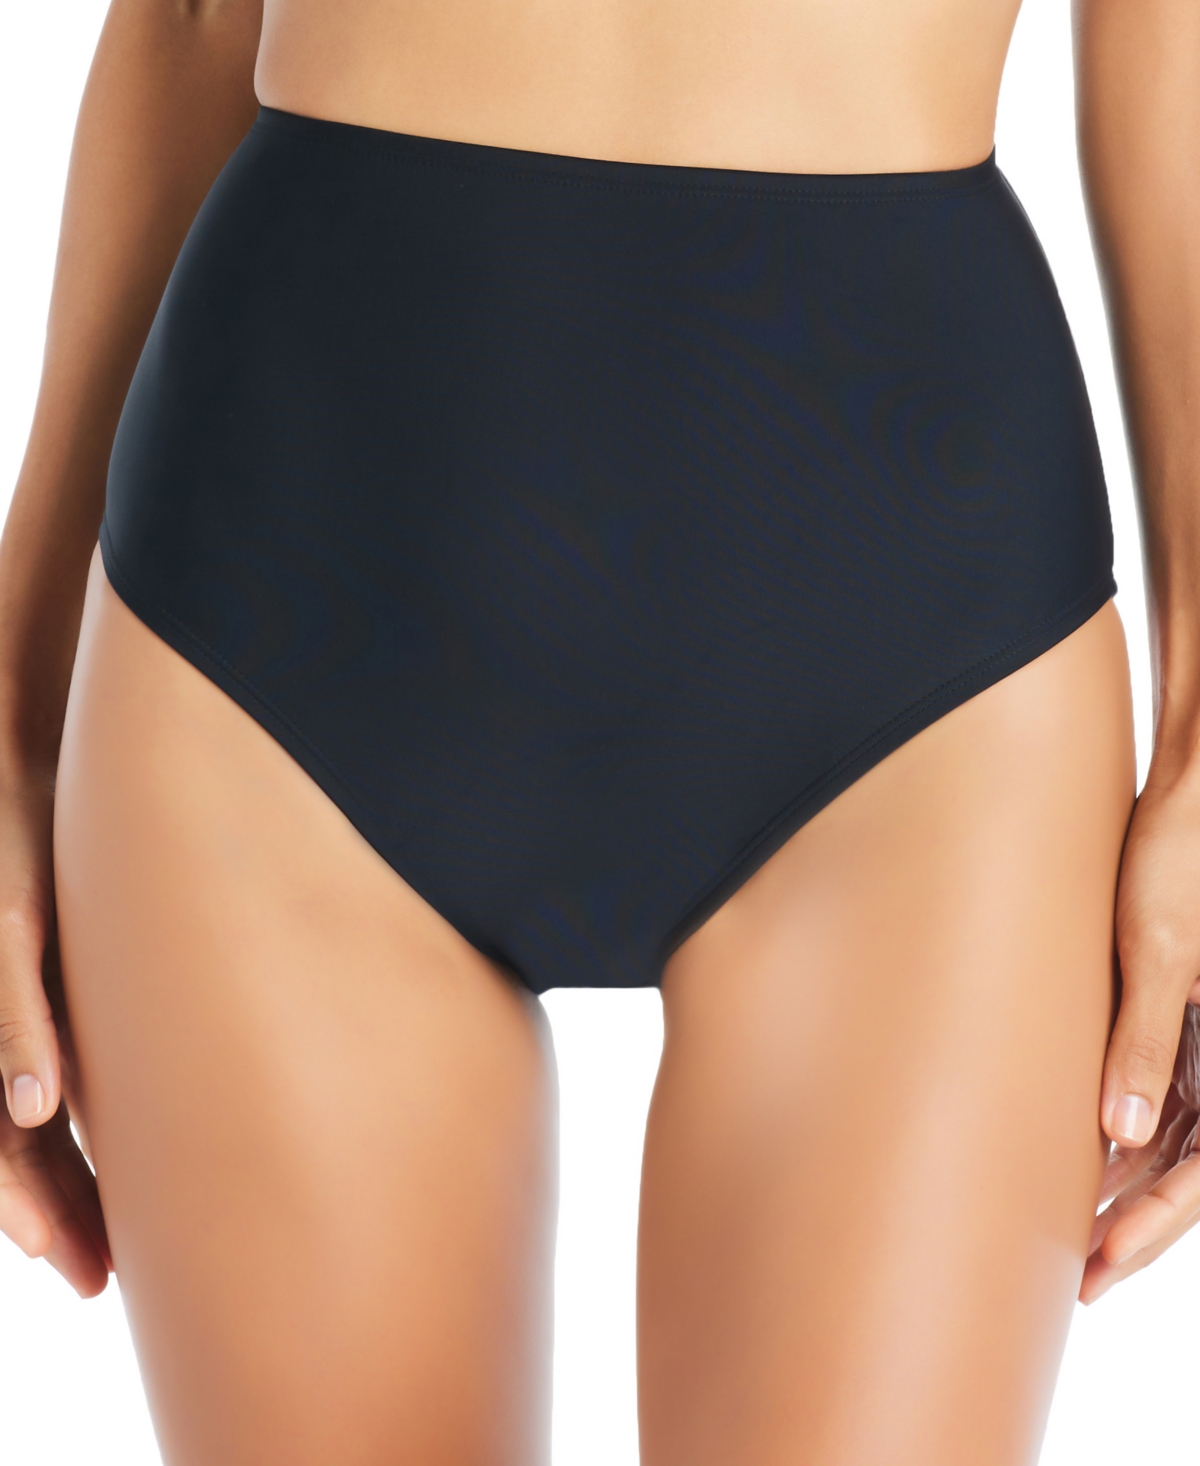 Beyond Control Women's Solid High-waisted Bikini Bottoms In Black